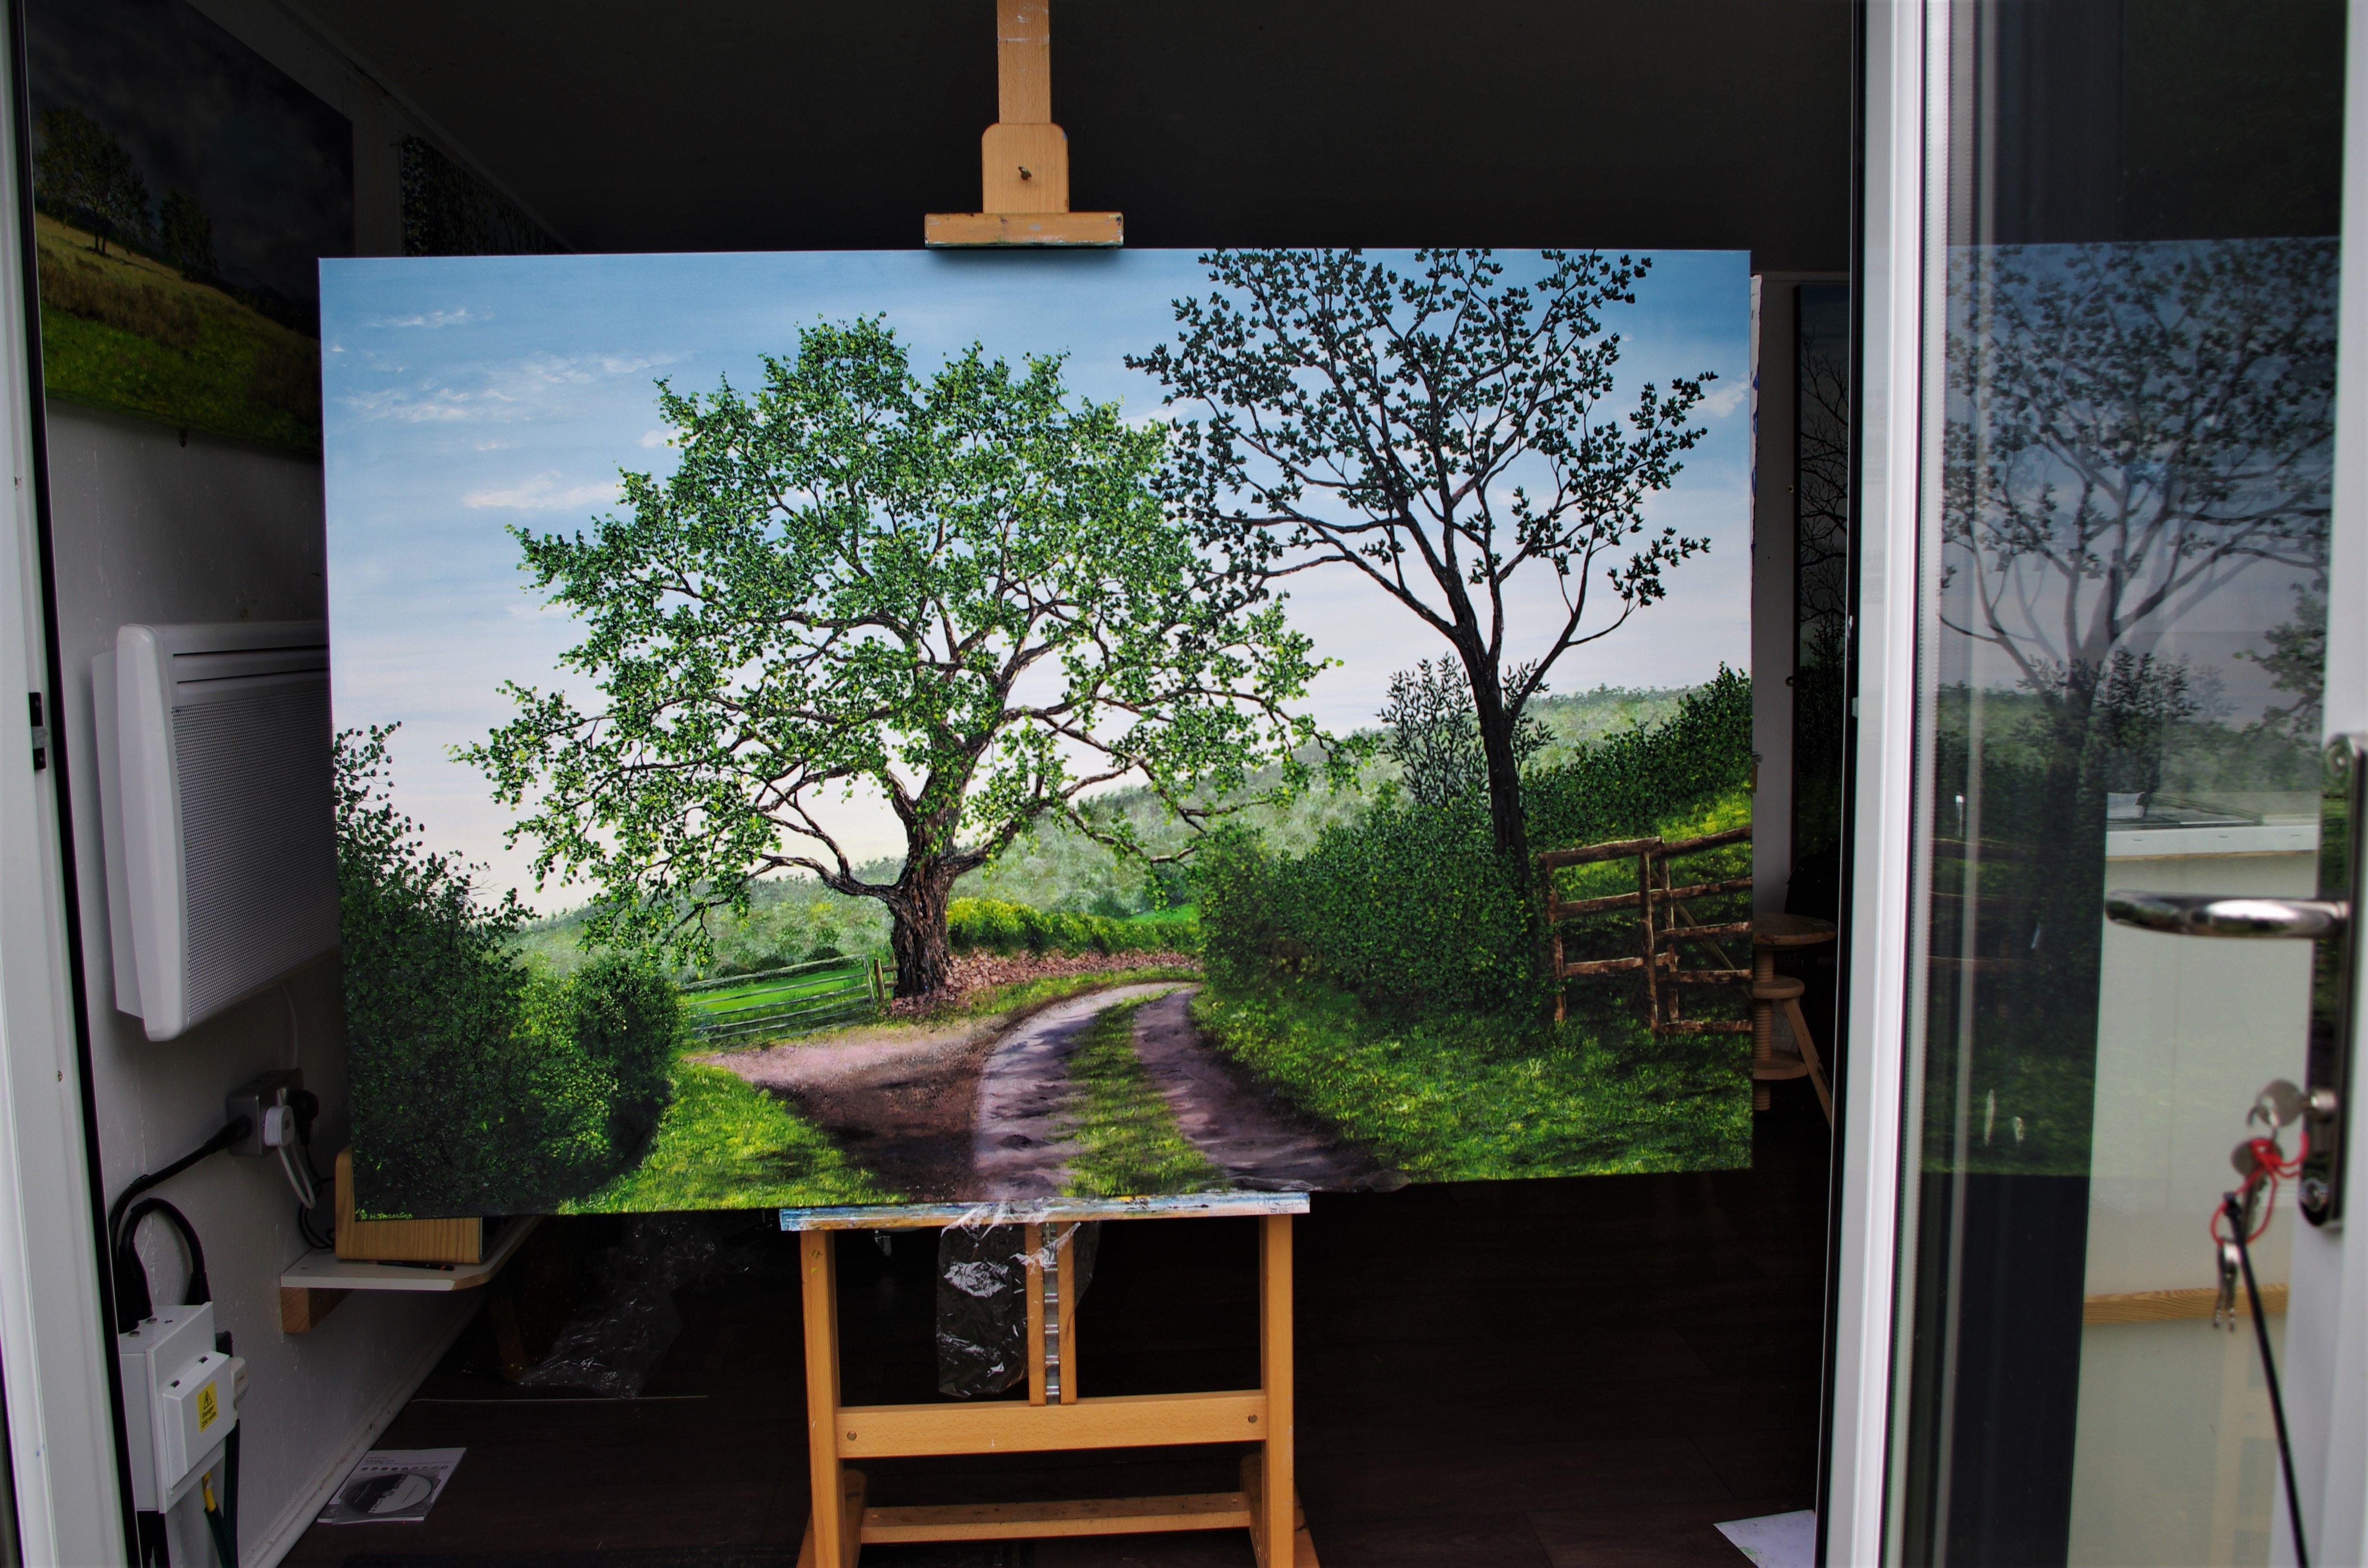 Mighty Summer Oak, Painting, Oil on Canvas 4